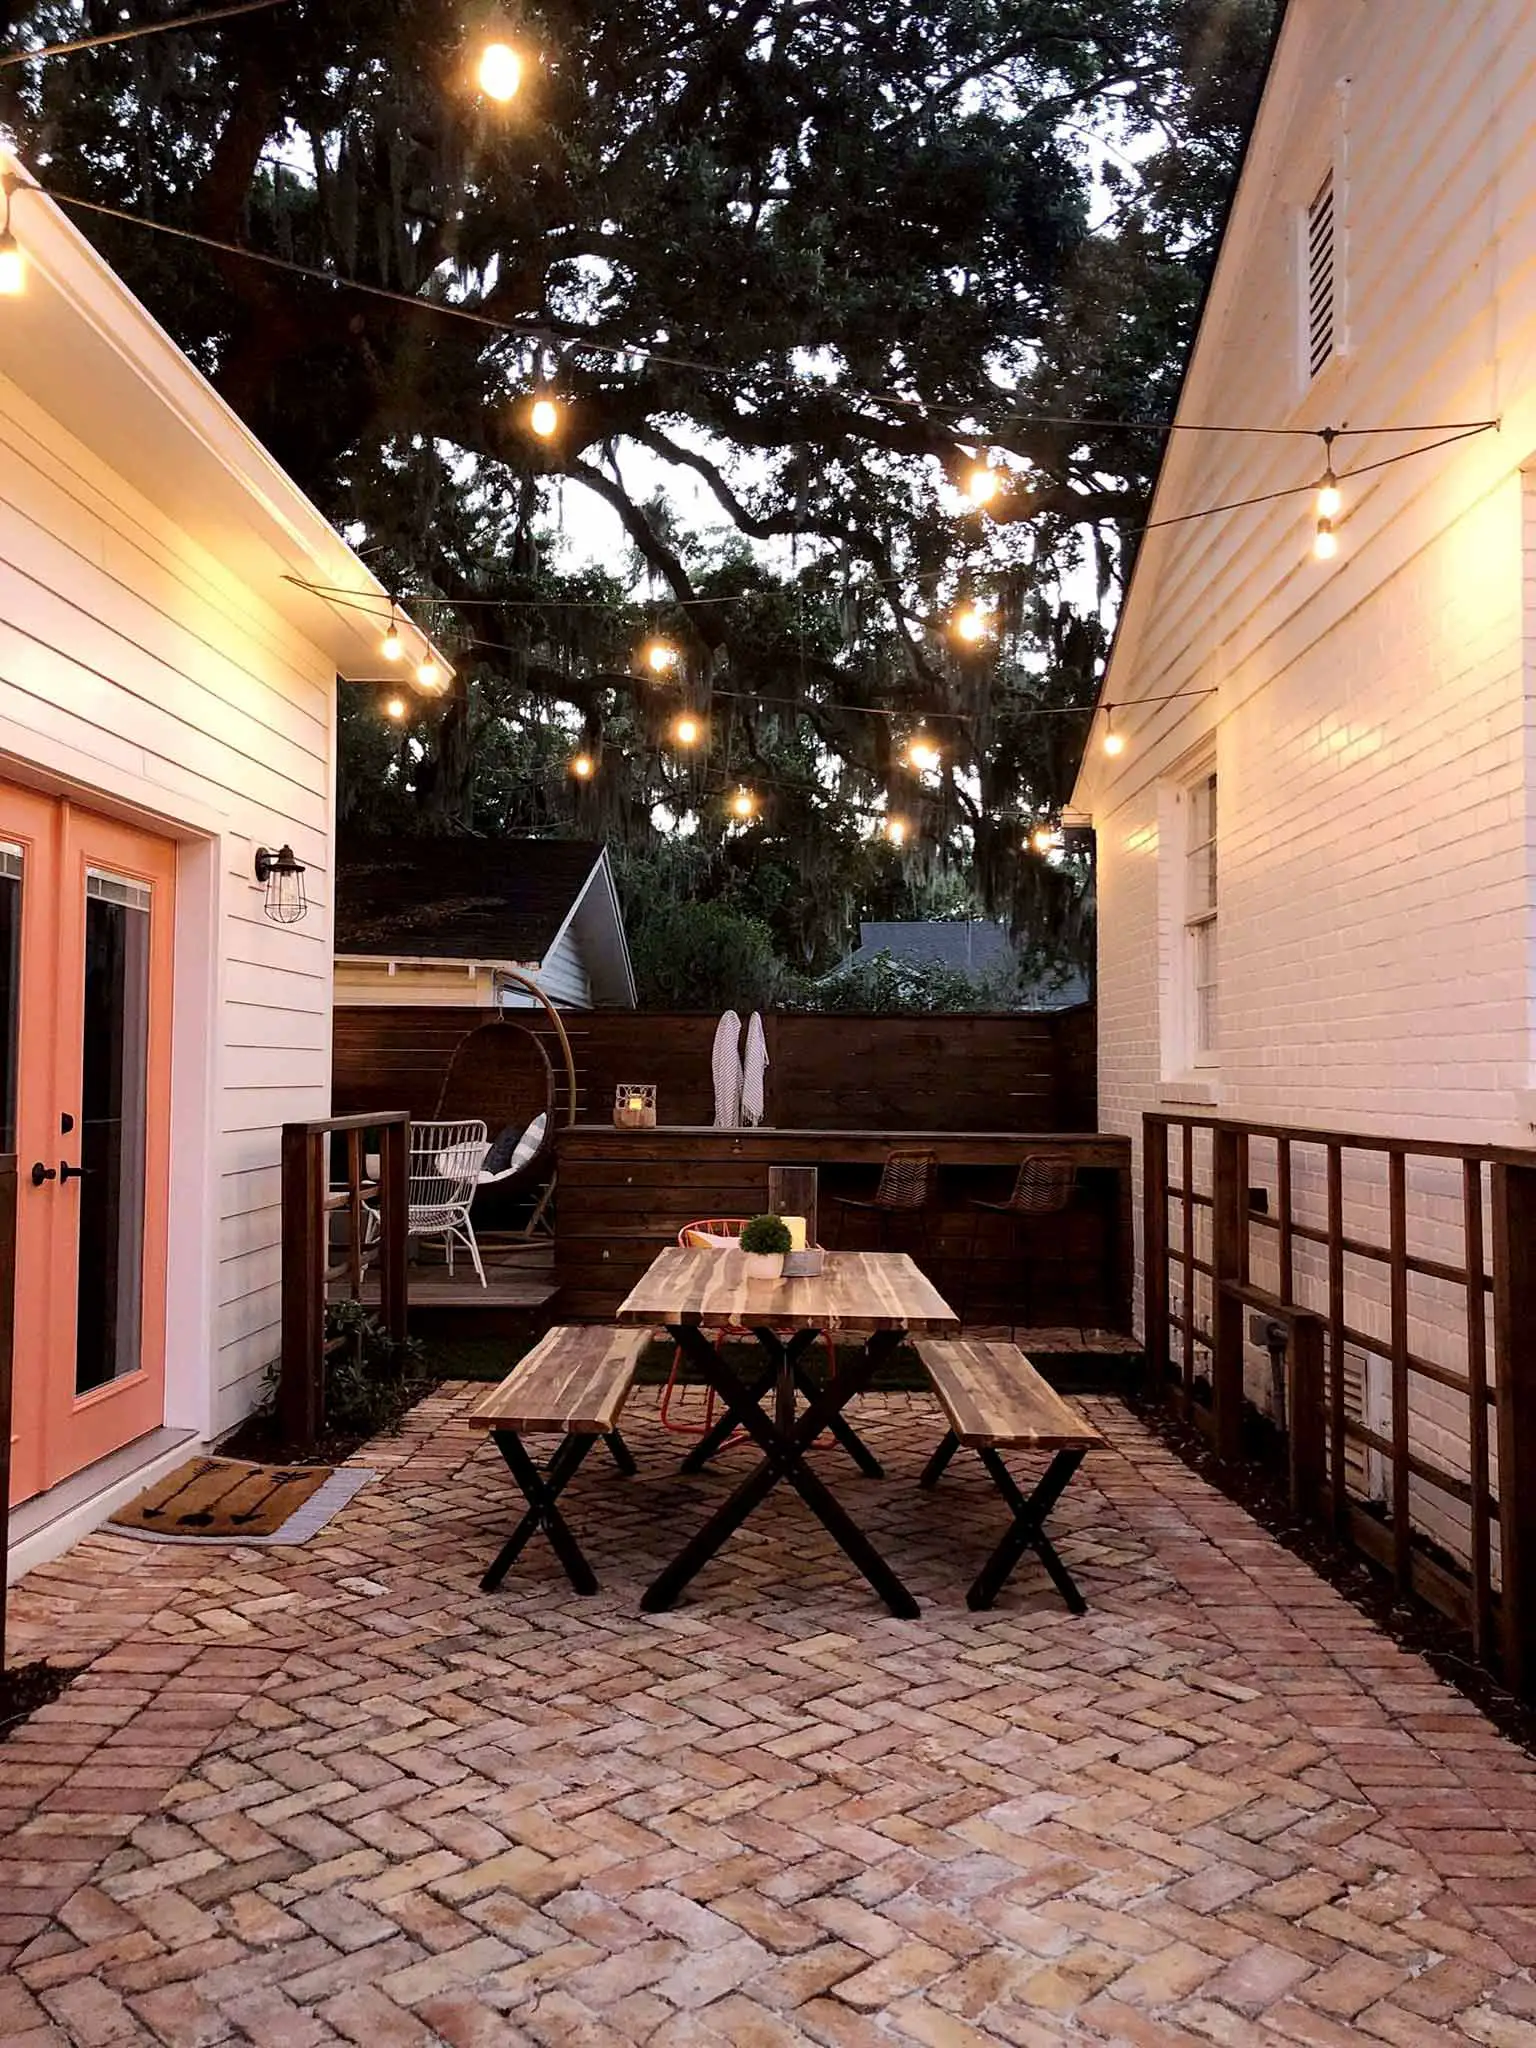 brick patio with table and benches under string lights